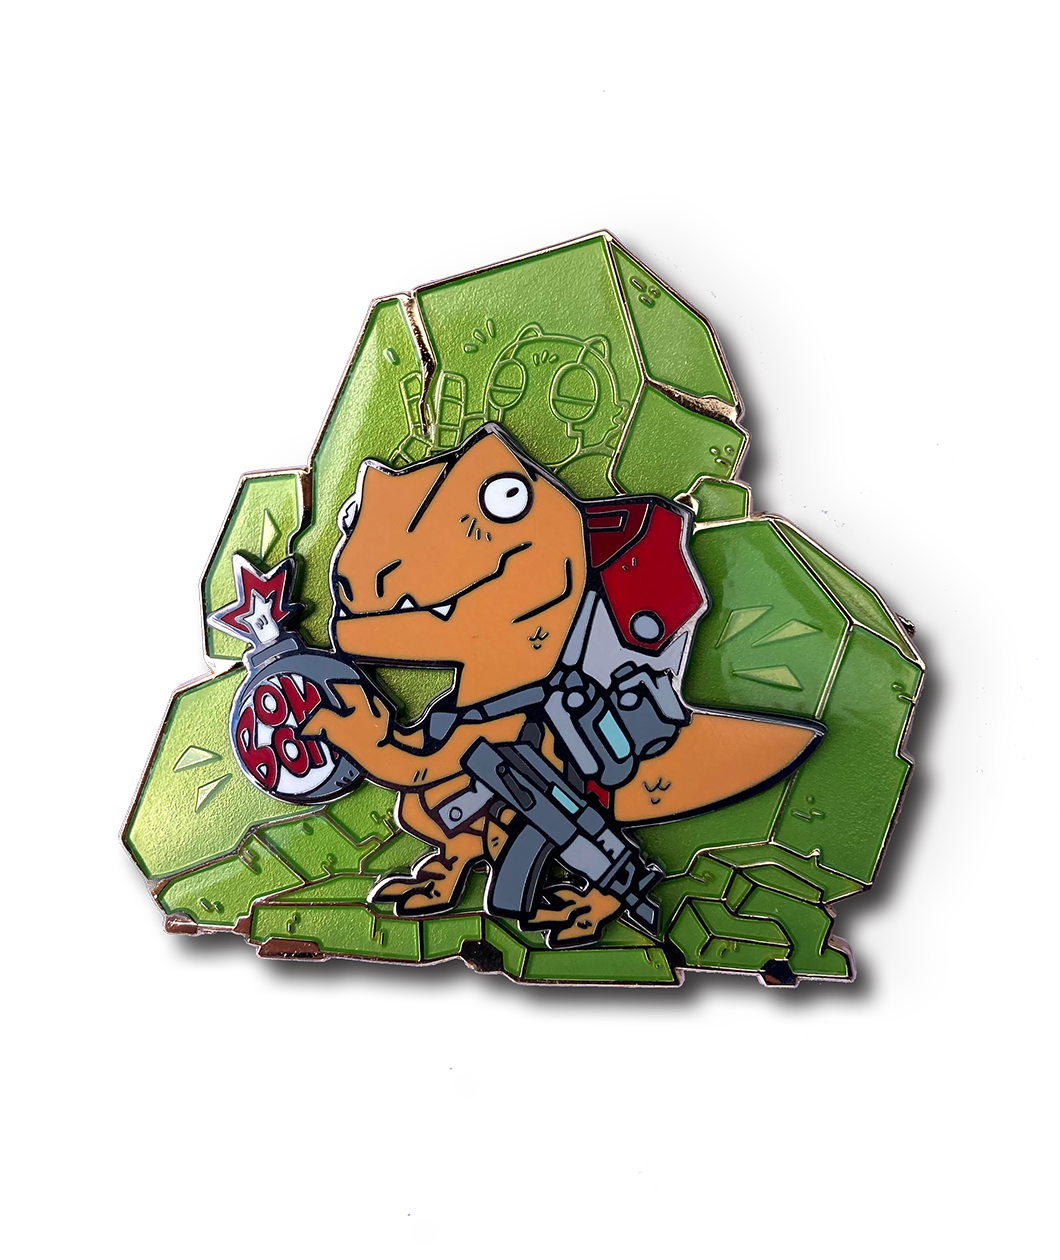 An orange t-rex holding a bomb and has weapons and ammunition strung around its body. T-rex is standing in front of green rock with an outline of a robot in the rock at the top - from Tesladyne